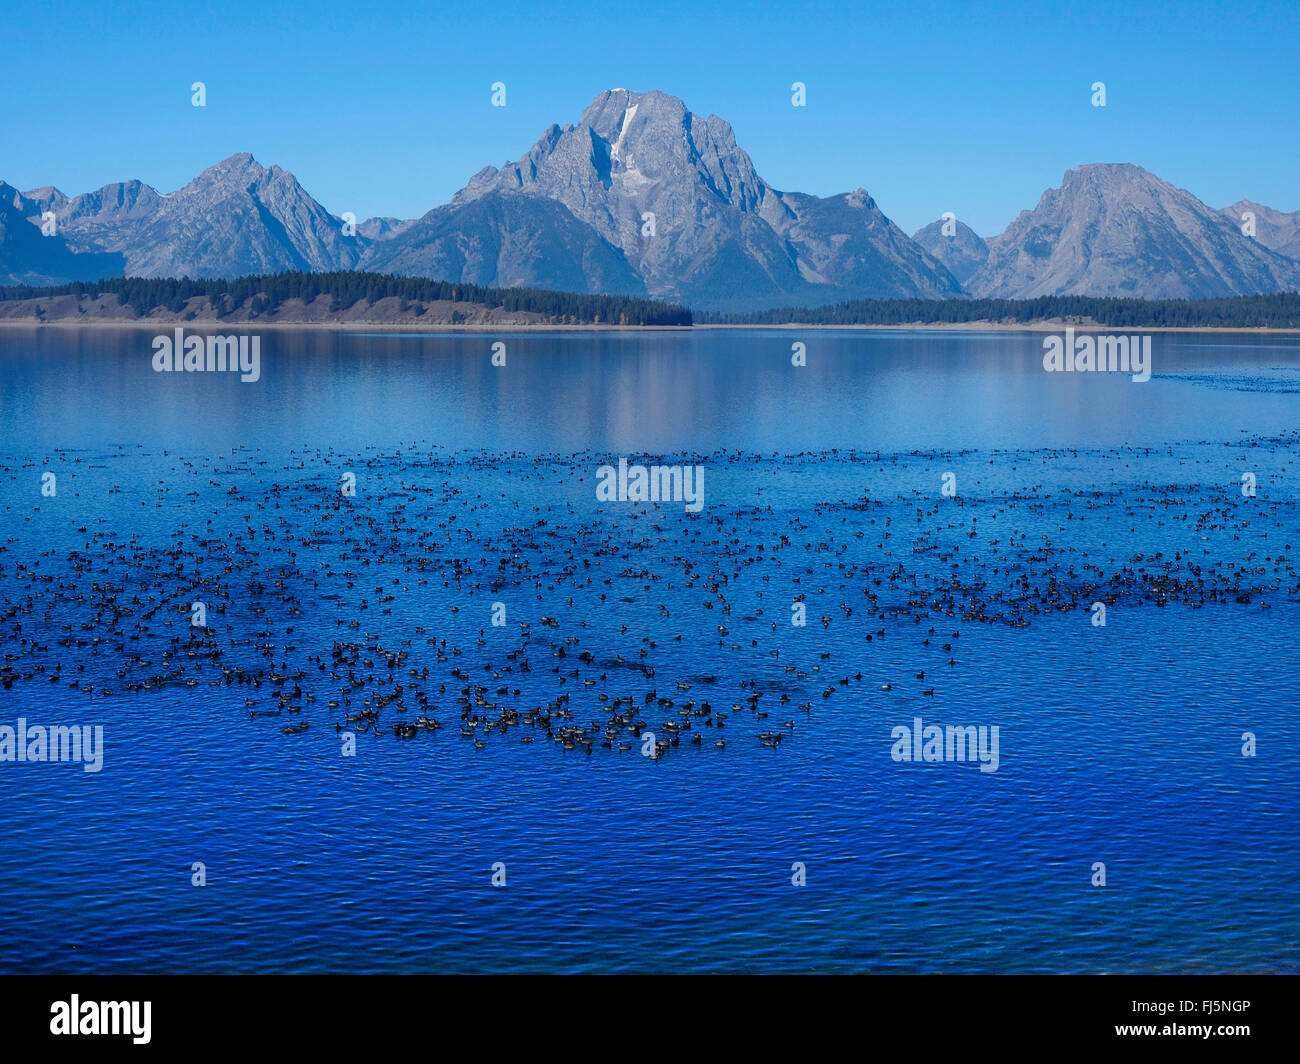 American coot (Fulica americana), Lake Jackson with lots of American coots and Mt. Moran in the back, USA, Wyoming, Grand Teton National Park Stock Photo